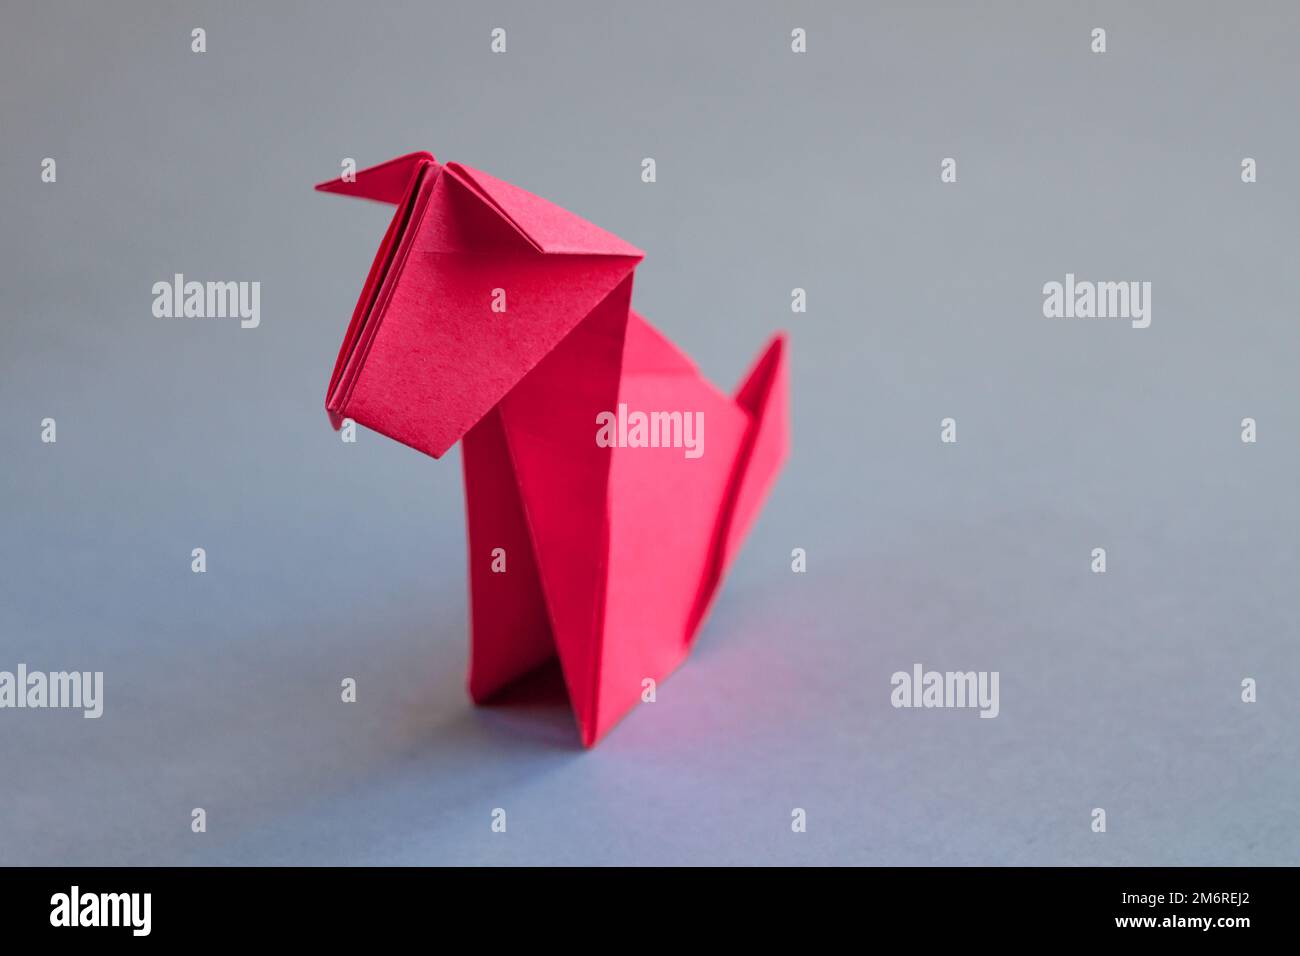 Red paper dog origami isolated on a grey background Stock Photo